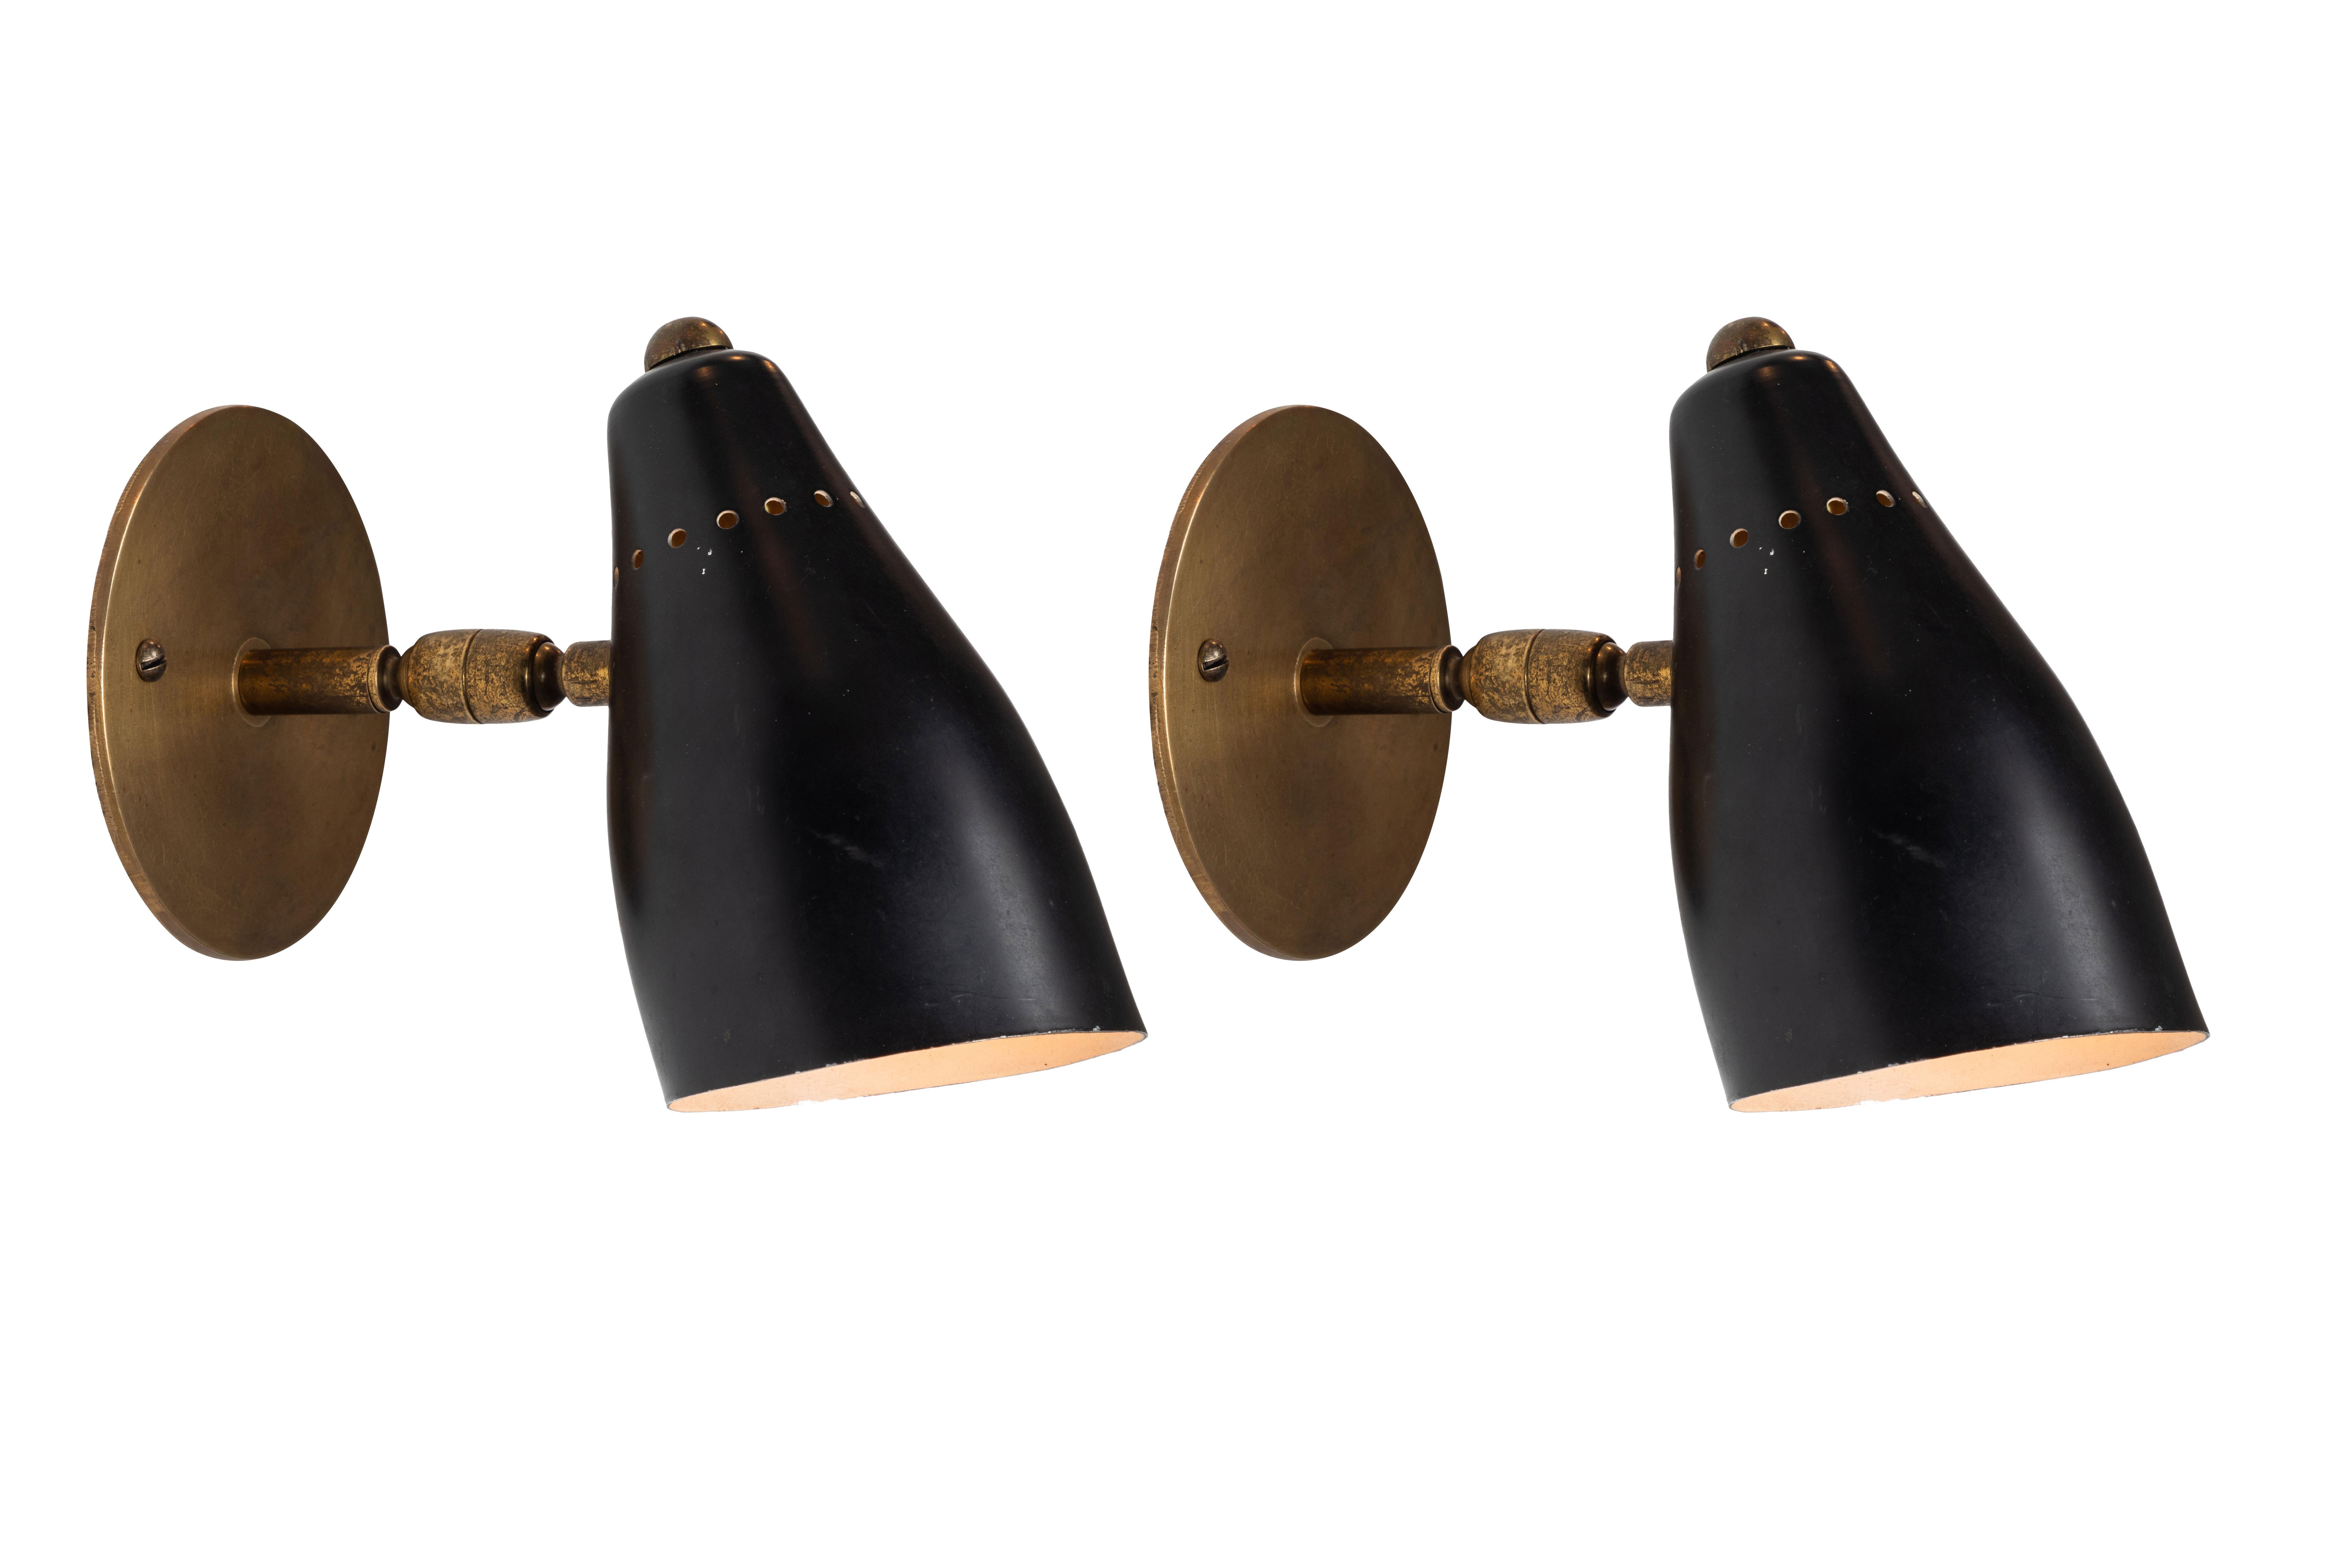 1950s Giuseppe Ostuni articulating sconces for O-Luce. Executed in brass and black painted aluminium with perforated shade. Sconces pivot up/down and left/right on two separate ball joints. Original on/off switch on top of lamp. Wired for US